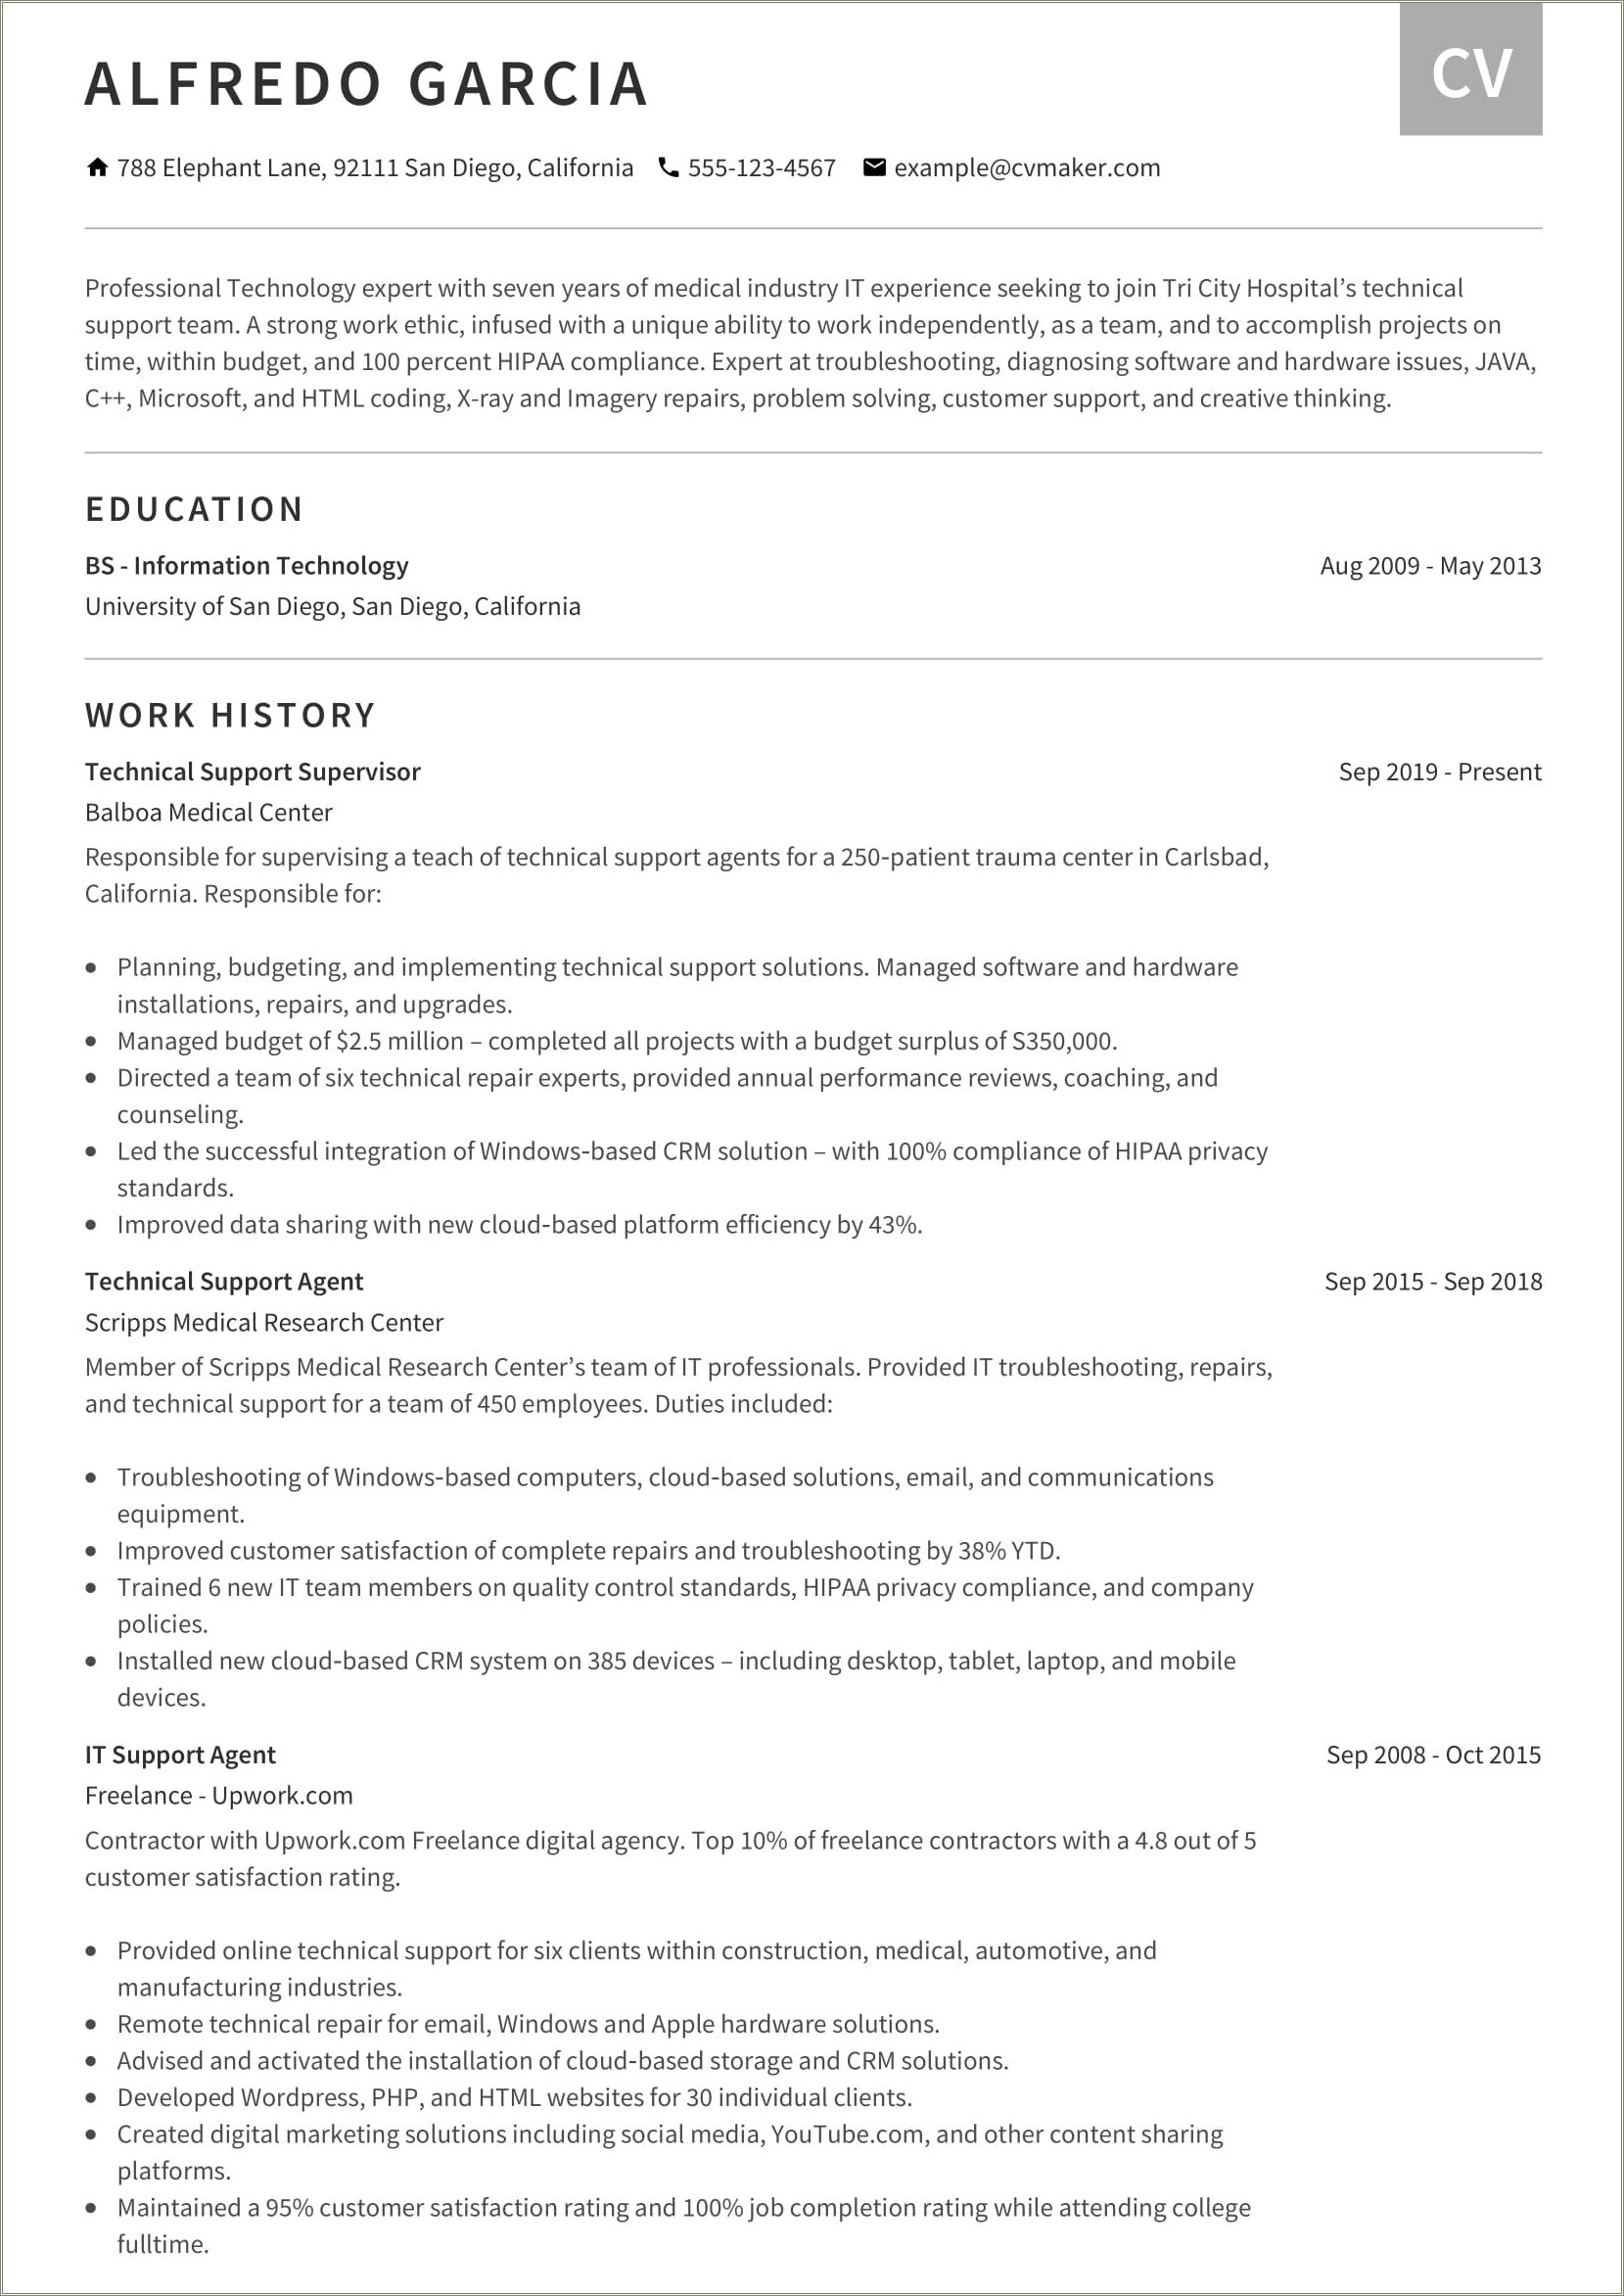 Resume With Work Independentlyand As A Team